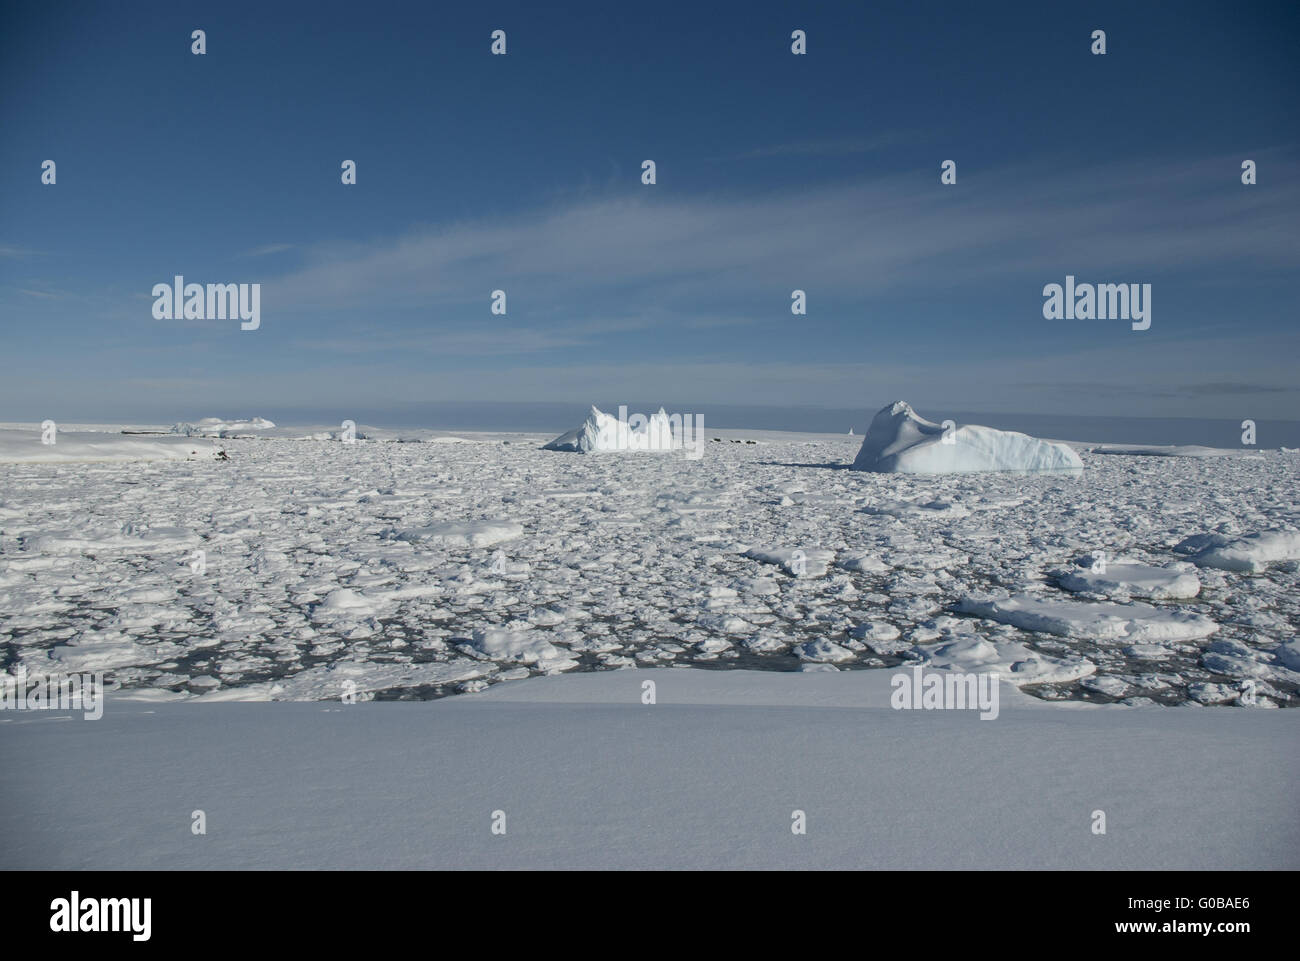 Icebergs in the Southern Ocean - 2. Stock Photo